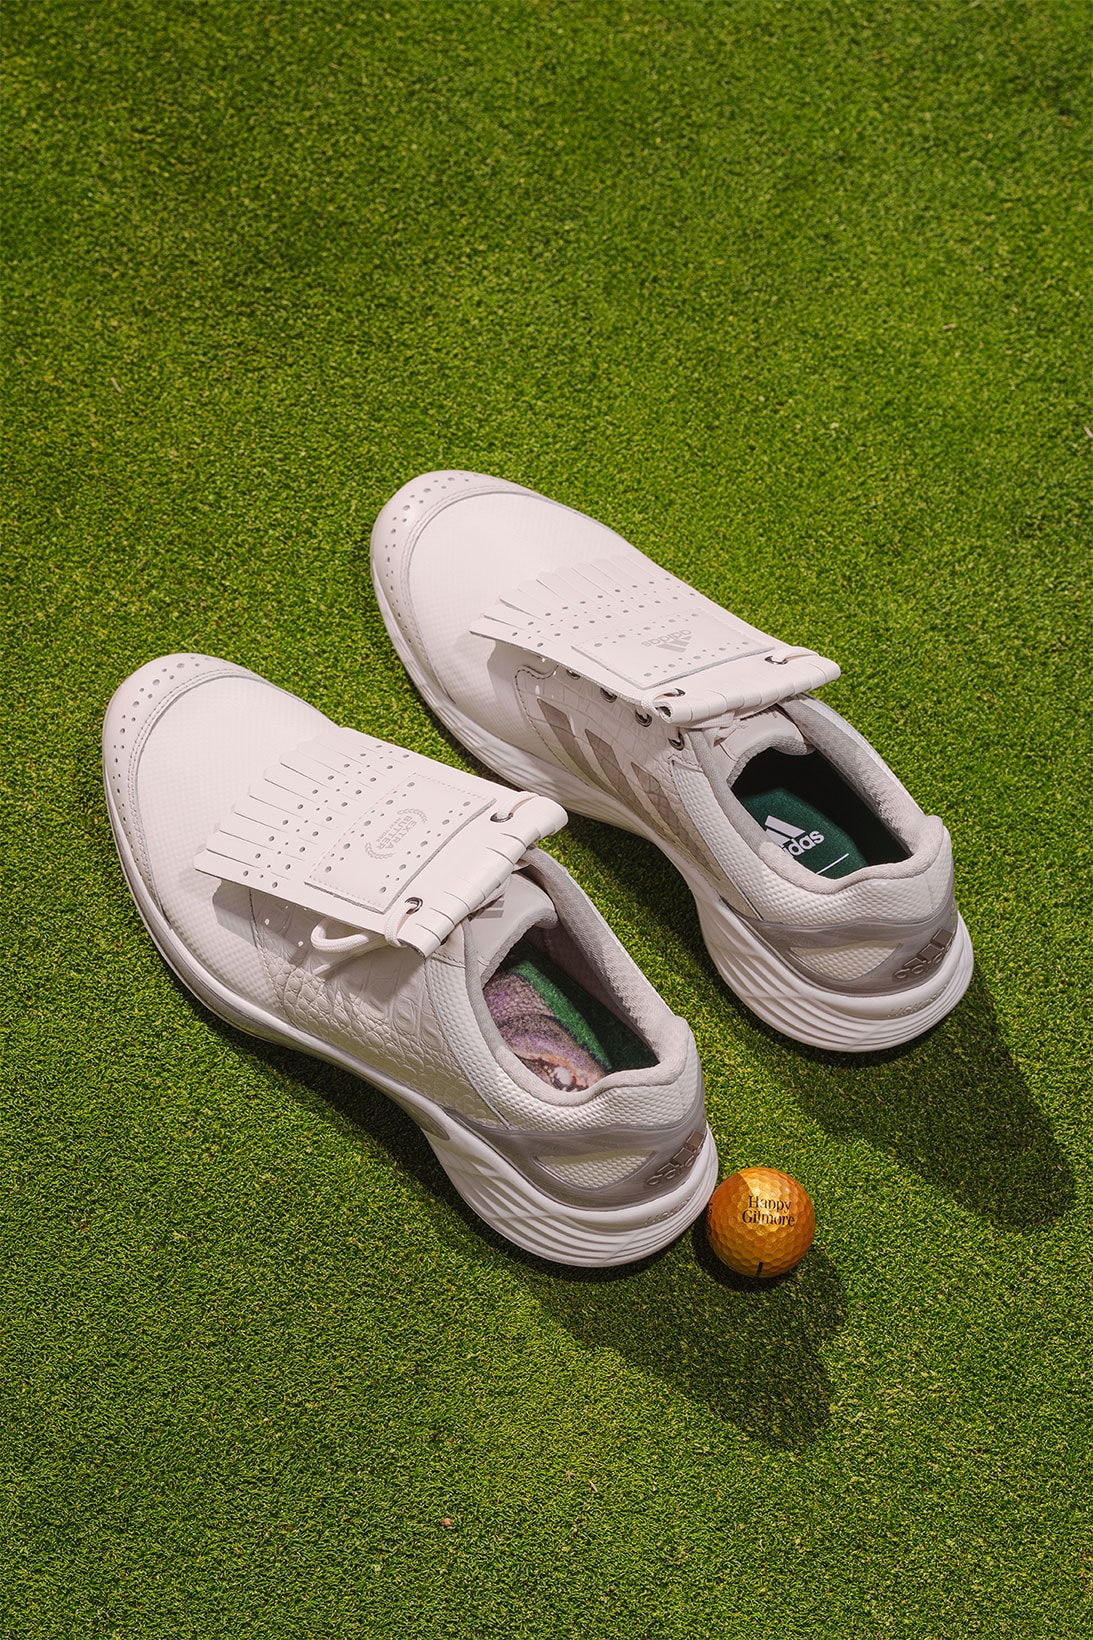 stylish best womens golf shoes adidas extra butter happy gilmore zg21